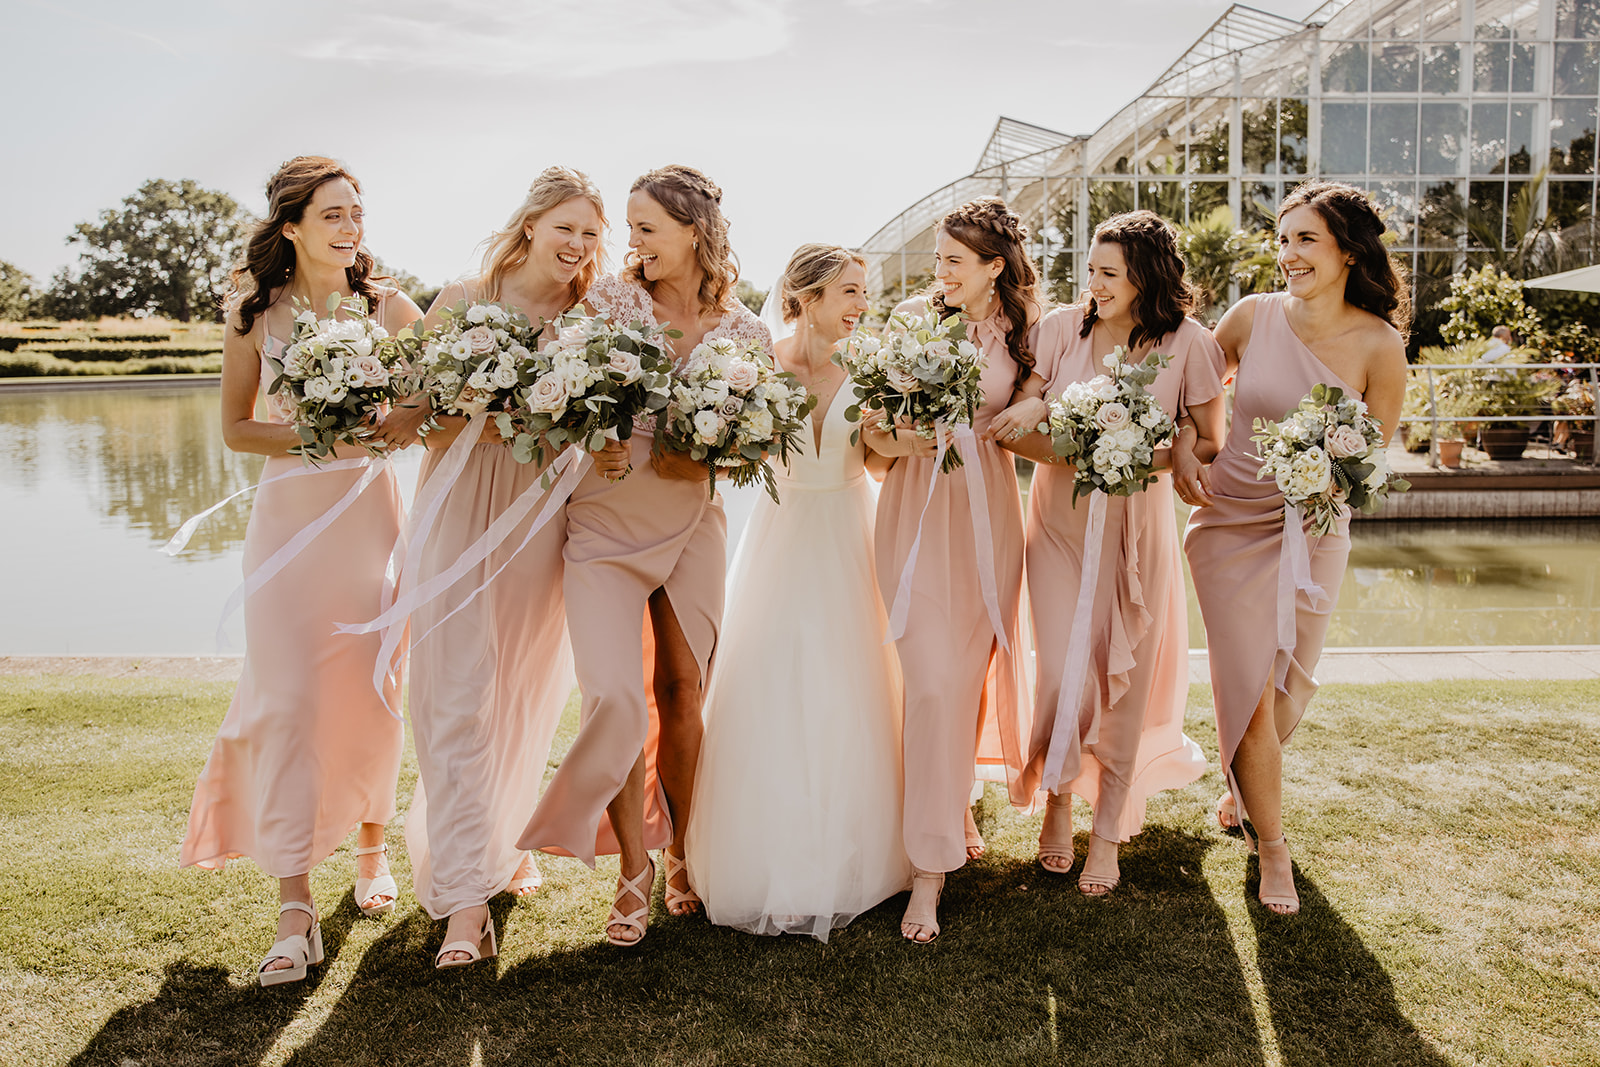 Bride and bridesmaids at a RHS Gardens Wisley Wedding. By Olive Joy Photography